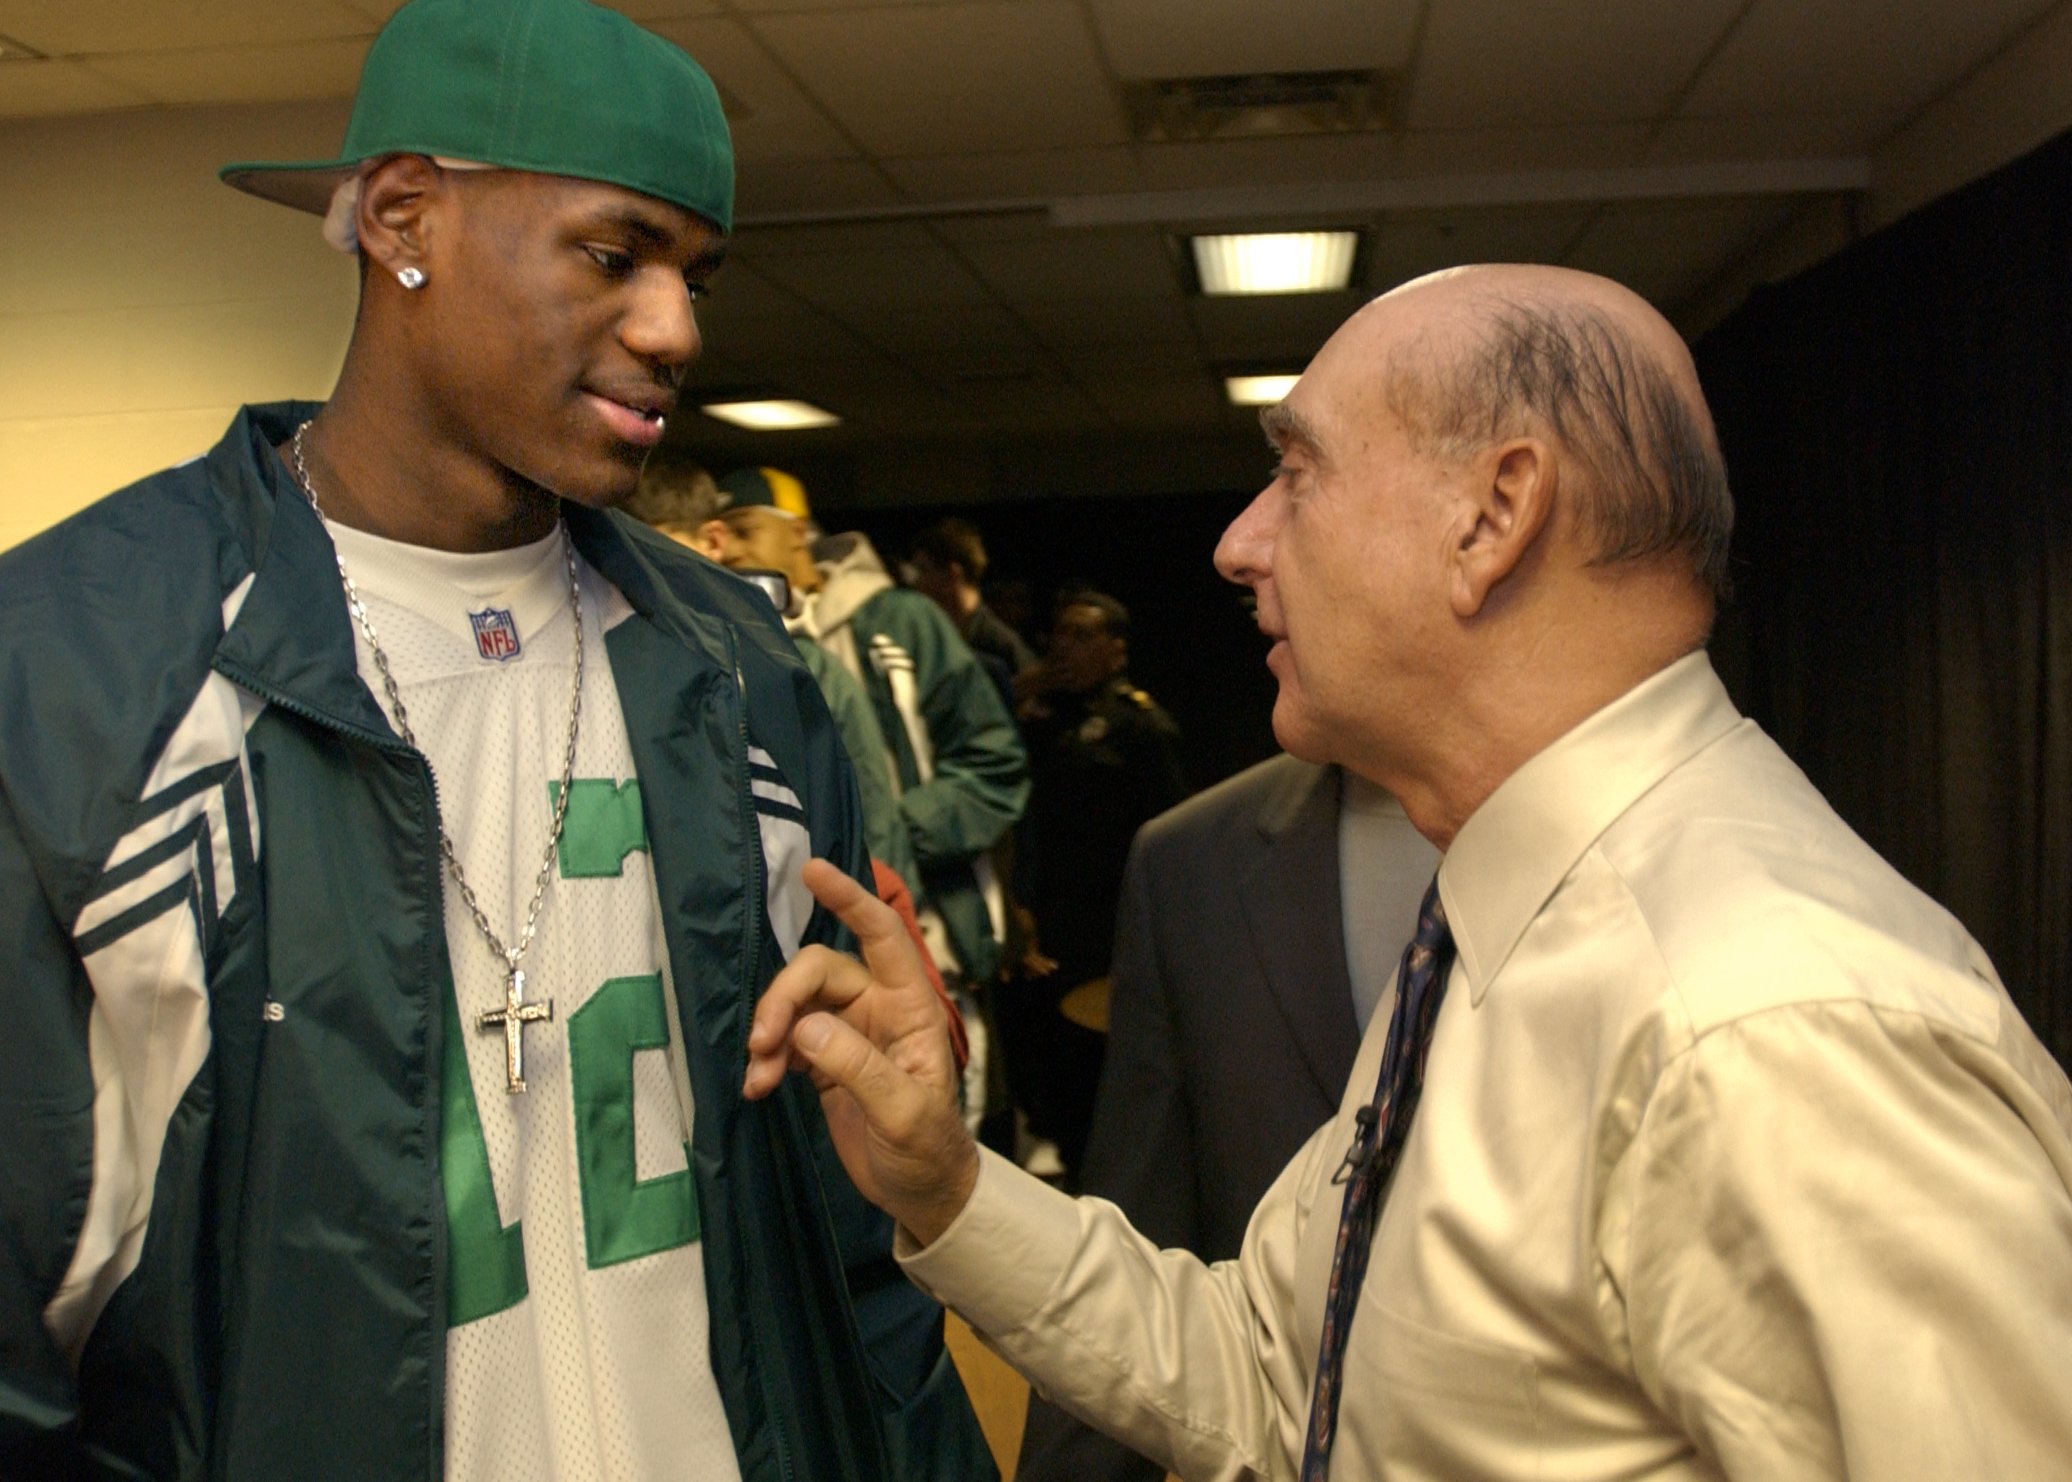 Dick Vitale, commentator for ESPN, talks to LeBron James before the SVSM-Oak Hill game Thursday, December 12, 2002 at the Cleveland State Convocation Center in Cleveland. Vitale and Bill Walton talked to the two teams before the game, telling the players about the importance of an education and encouraging the players to go to college.  (Joshua Gunter/ The Plain Dealer)JOSHUA GUNTER THE PLAIN DEALER St. Vincent-St. Mary's LeBron James chats with ESPN's Dick Vitale before the Irish's game with Oak Hill Academy on Dec. 12, 2002. The Plain Dealer